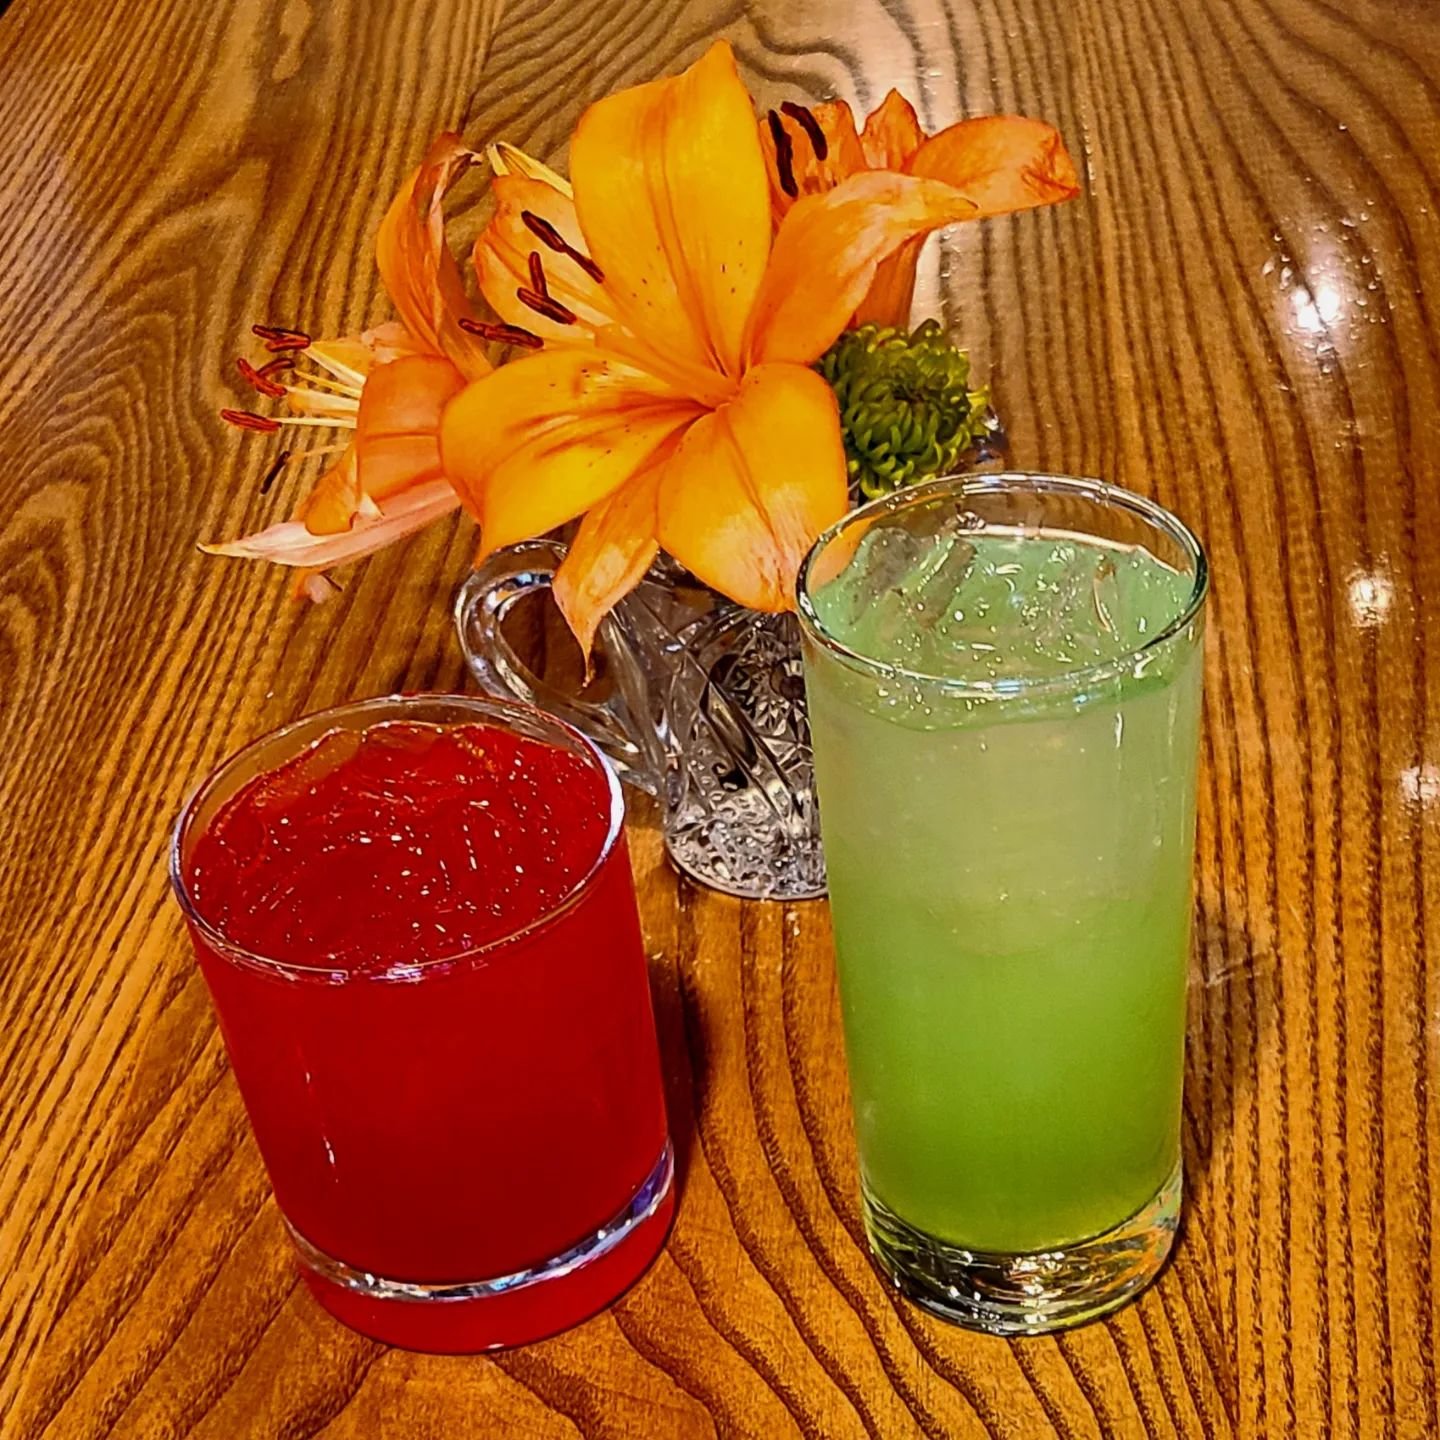 May the Fourth be with you! 

Chris whipped up a Cherry Berry Sith Vodka Punch and a Melon Limoncello Jedi Sour for the occasion. 

Come in for a cocktail or two and ask us about our Star Wars themed May Speakeasy on the 20th, or our Mother's Day Spe